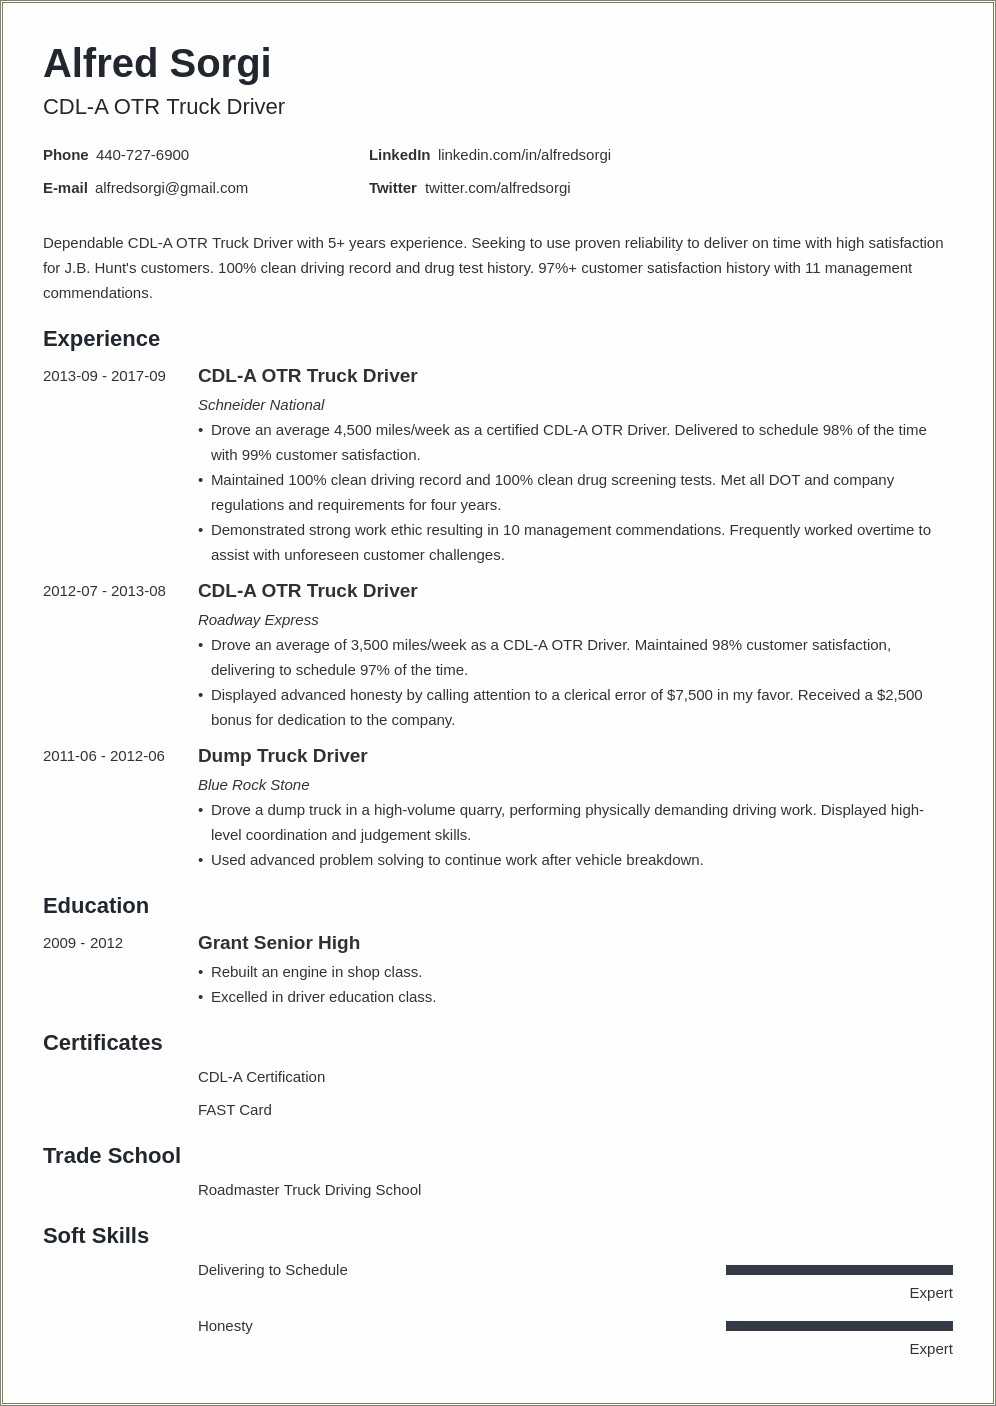 Example Of A Resume For An Uber Driver